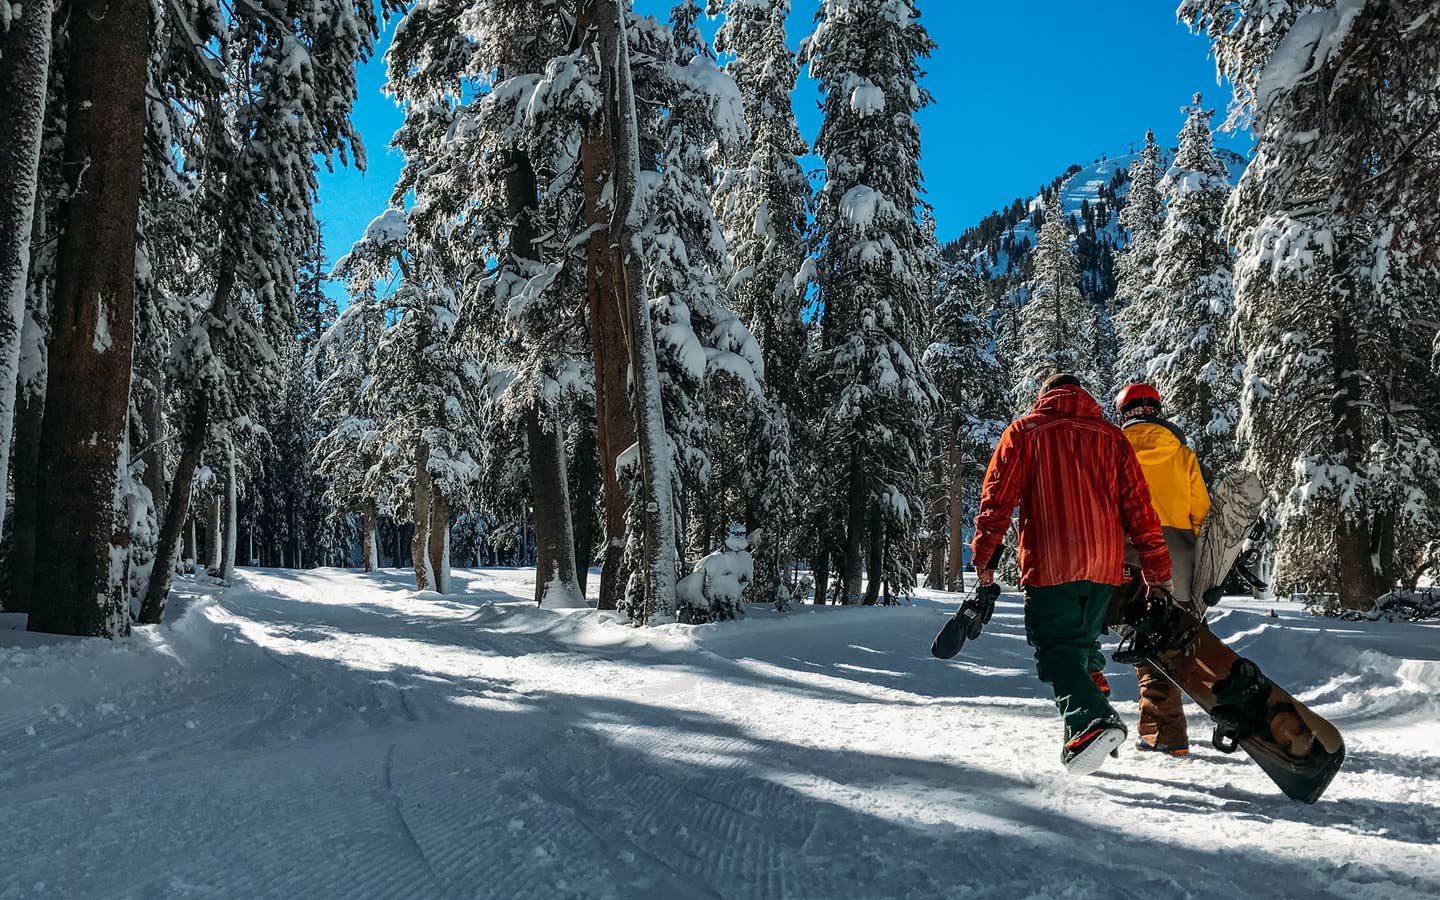 Two men walk a snow-covered trail in a pine tree forest wearing snowboarding gear and carrying snowboards.